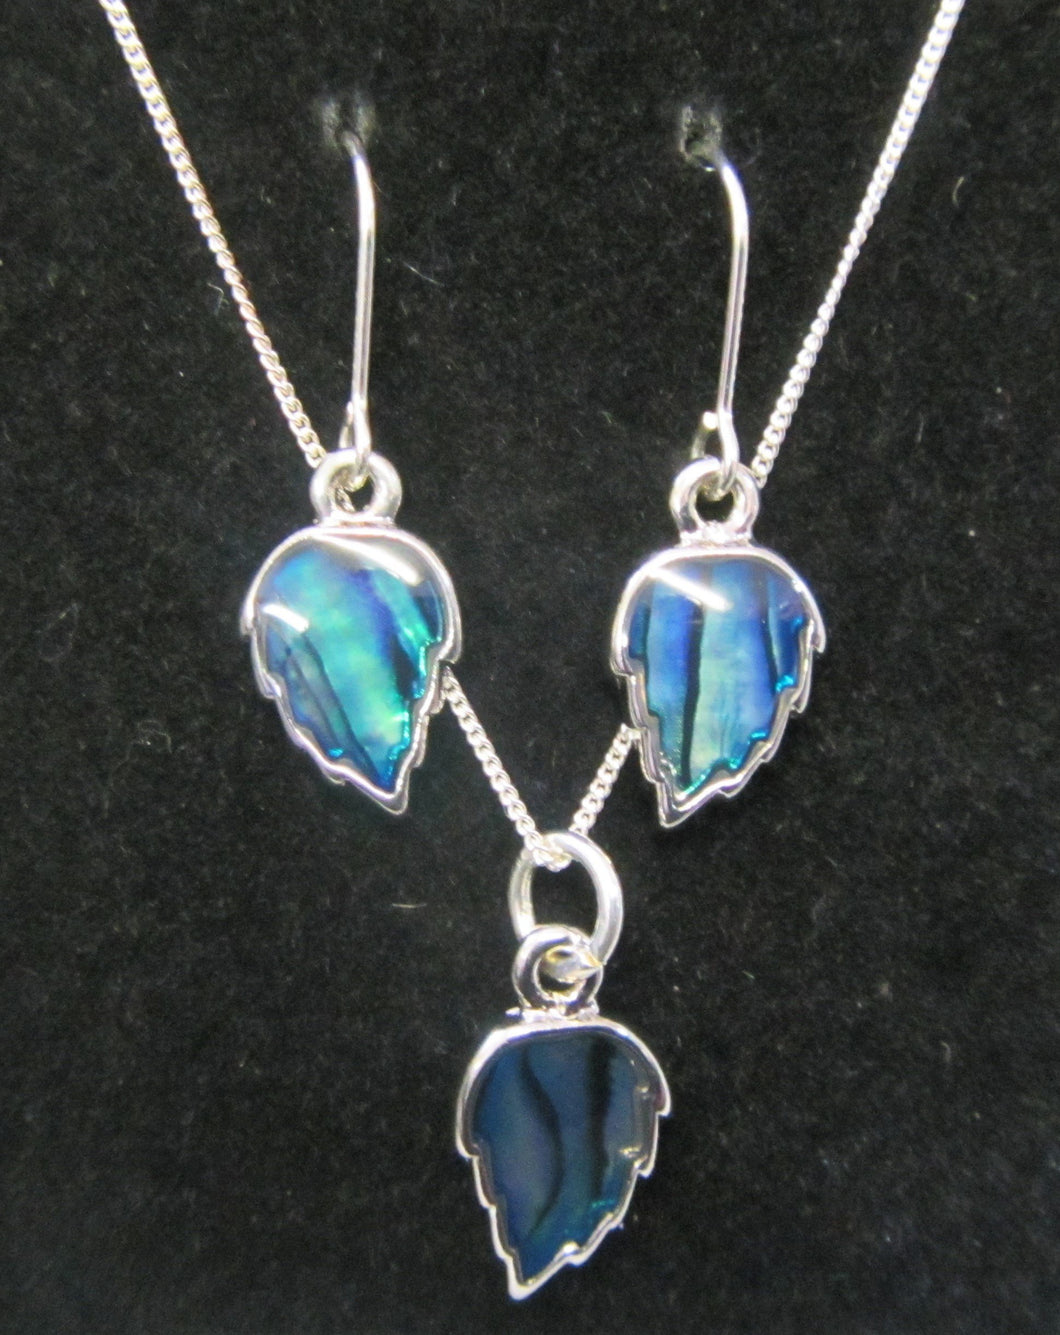 Beautiful handcrafted sterling silver blue abalone leaf jewellery set